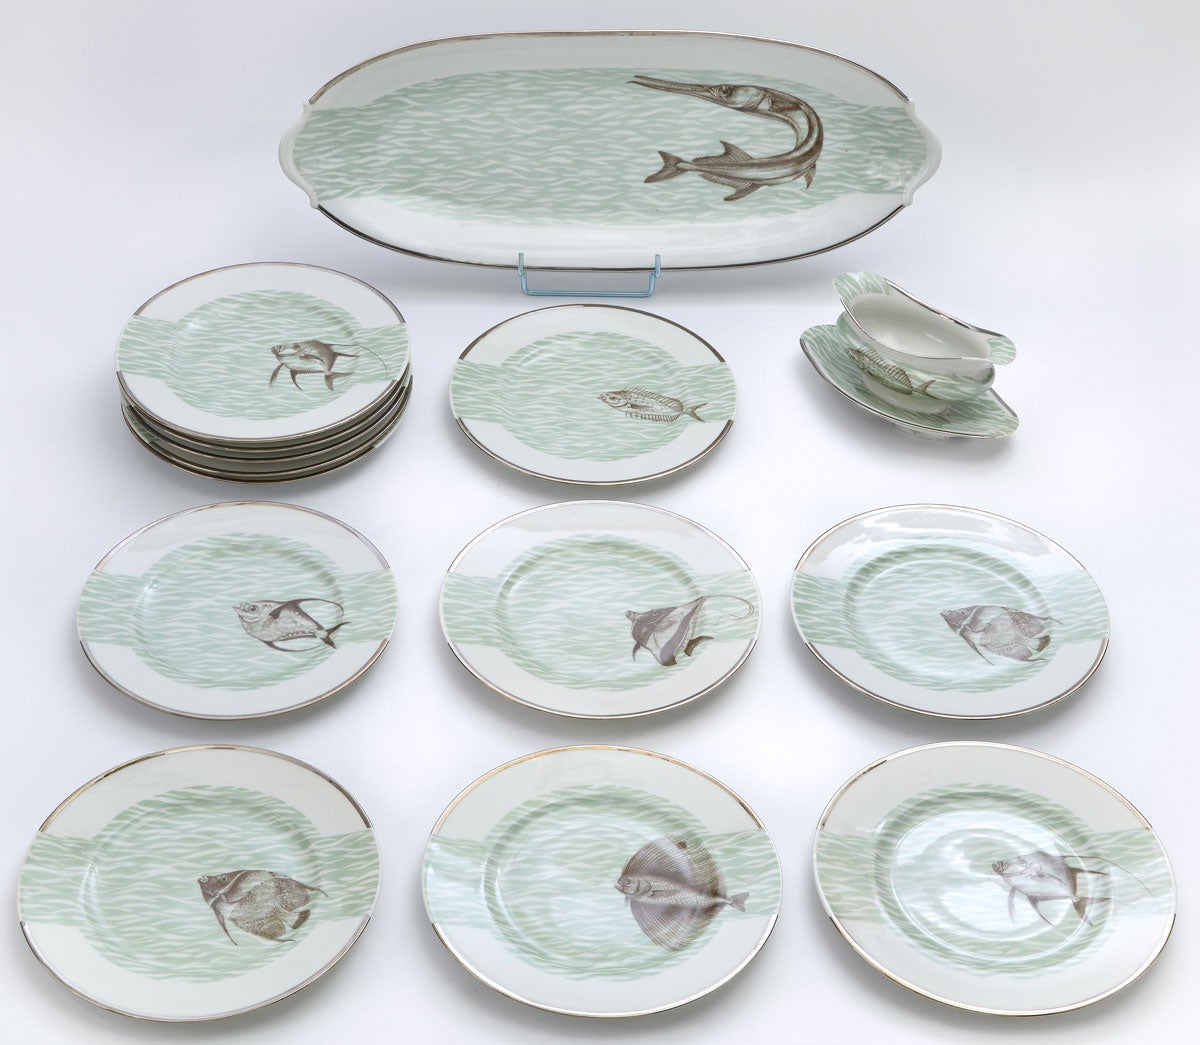 Fish service in Bernardaud Limoges porcelain for 12 people.
Wonderfully decorated with a turquoise pattern and exotic fishes executed in grisaille such after engravings of the Cuvier and Valenciennes 'Natural History of Fishes' between 1828 and